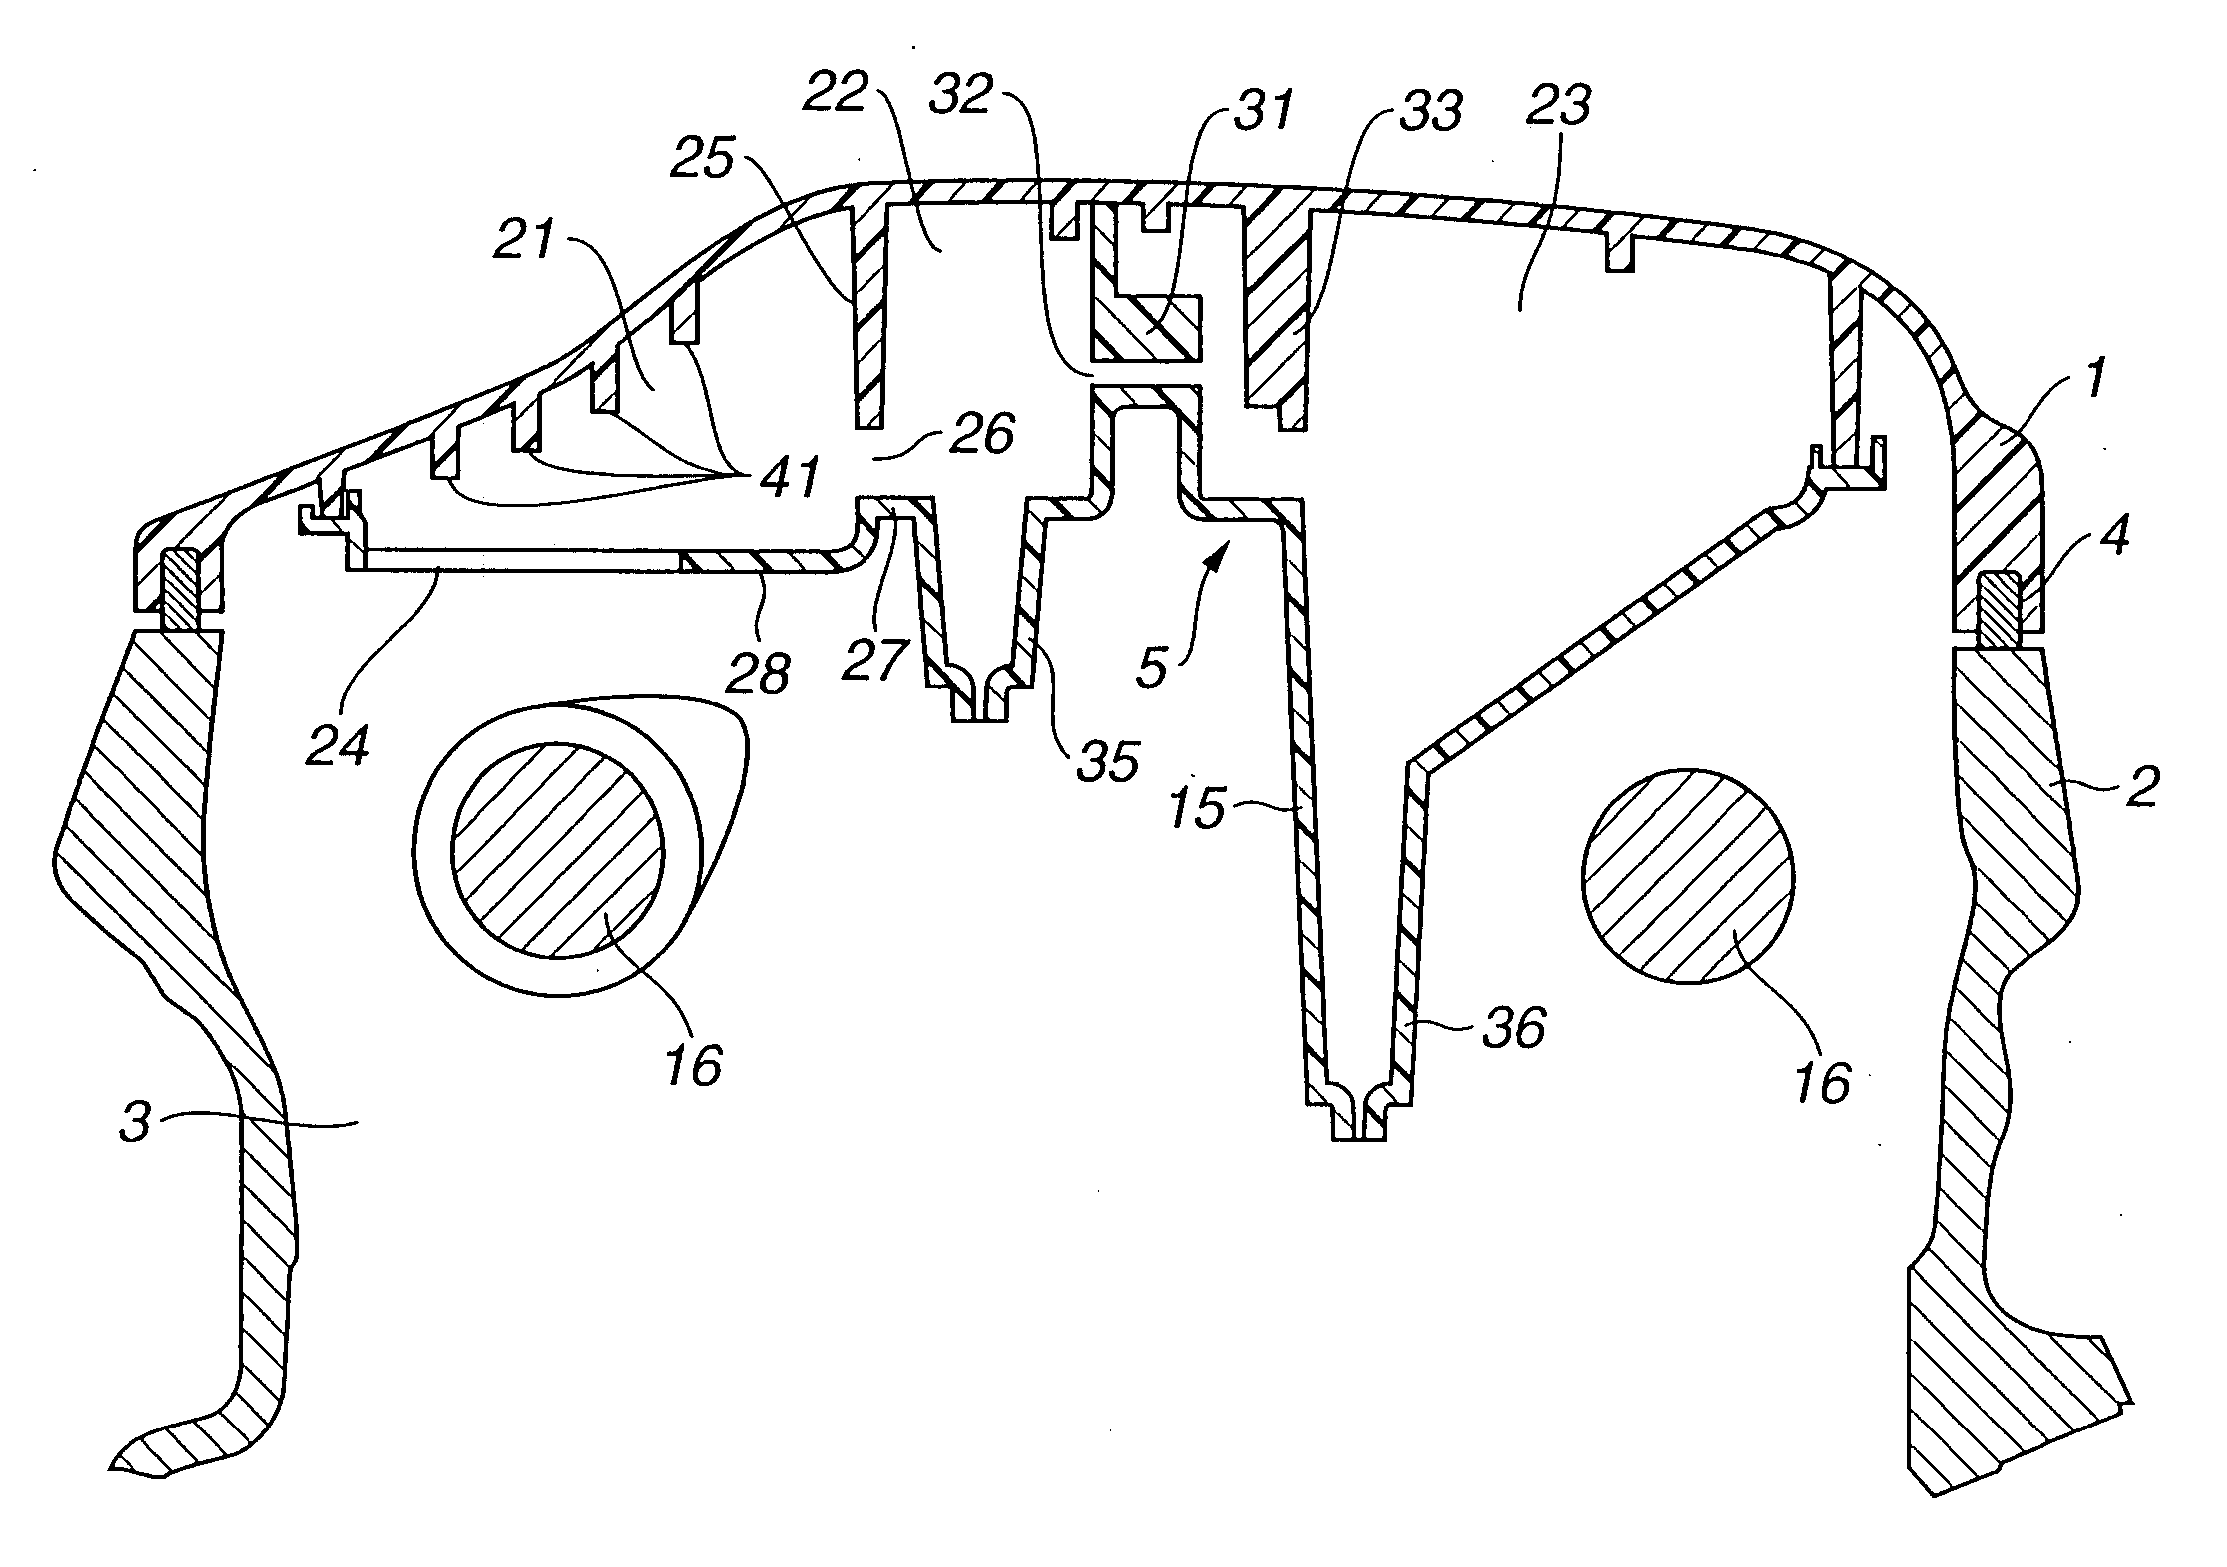 Oil separator combined with cylinder head cover